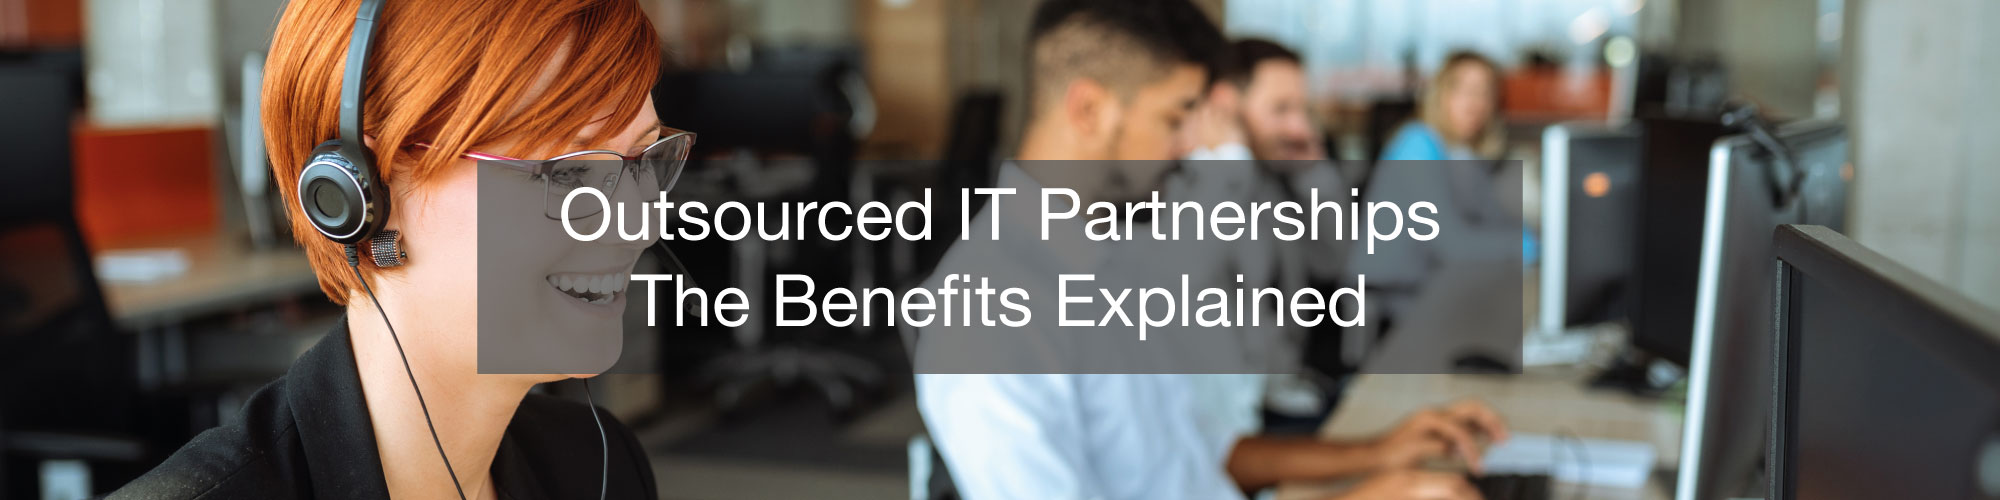 Outsourced IT Partnerships